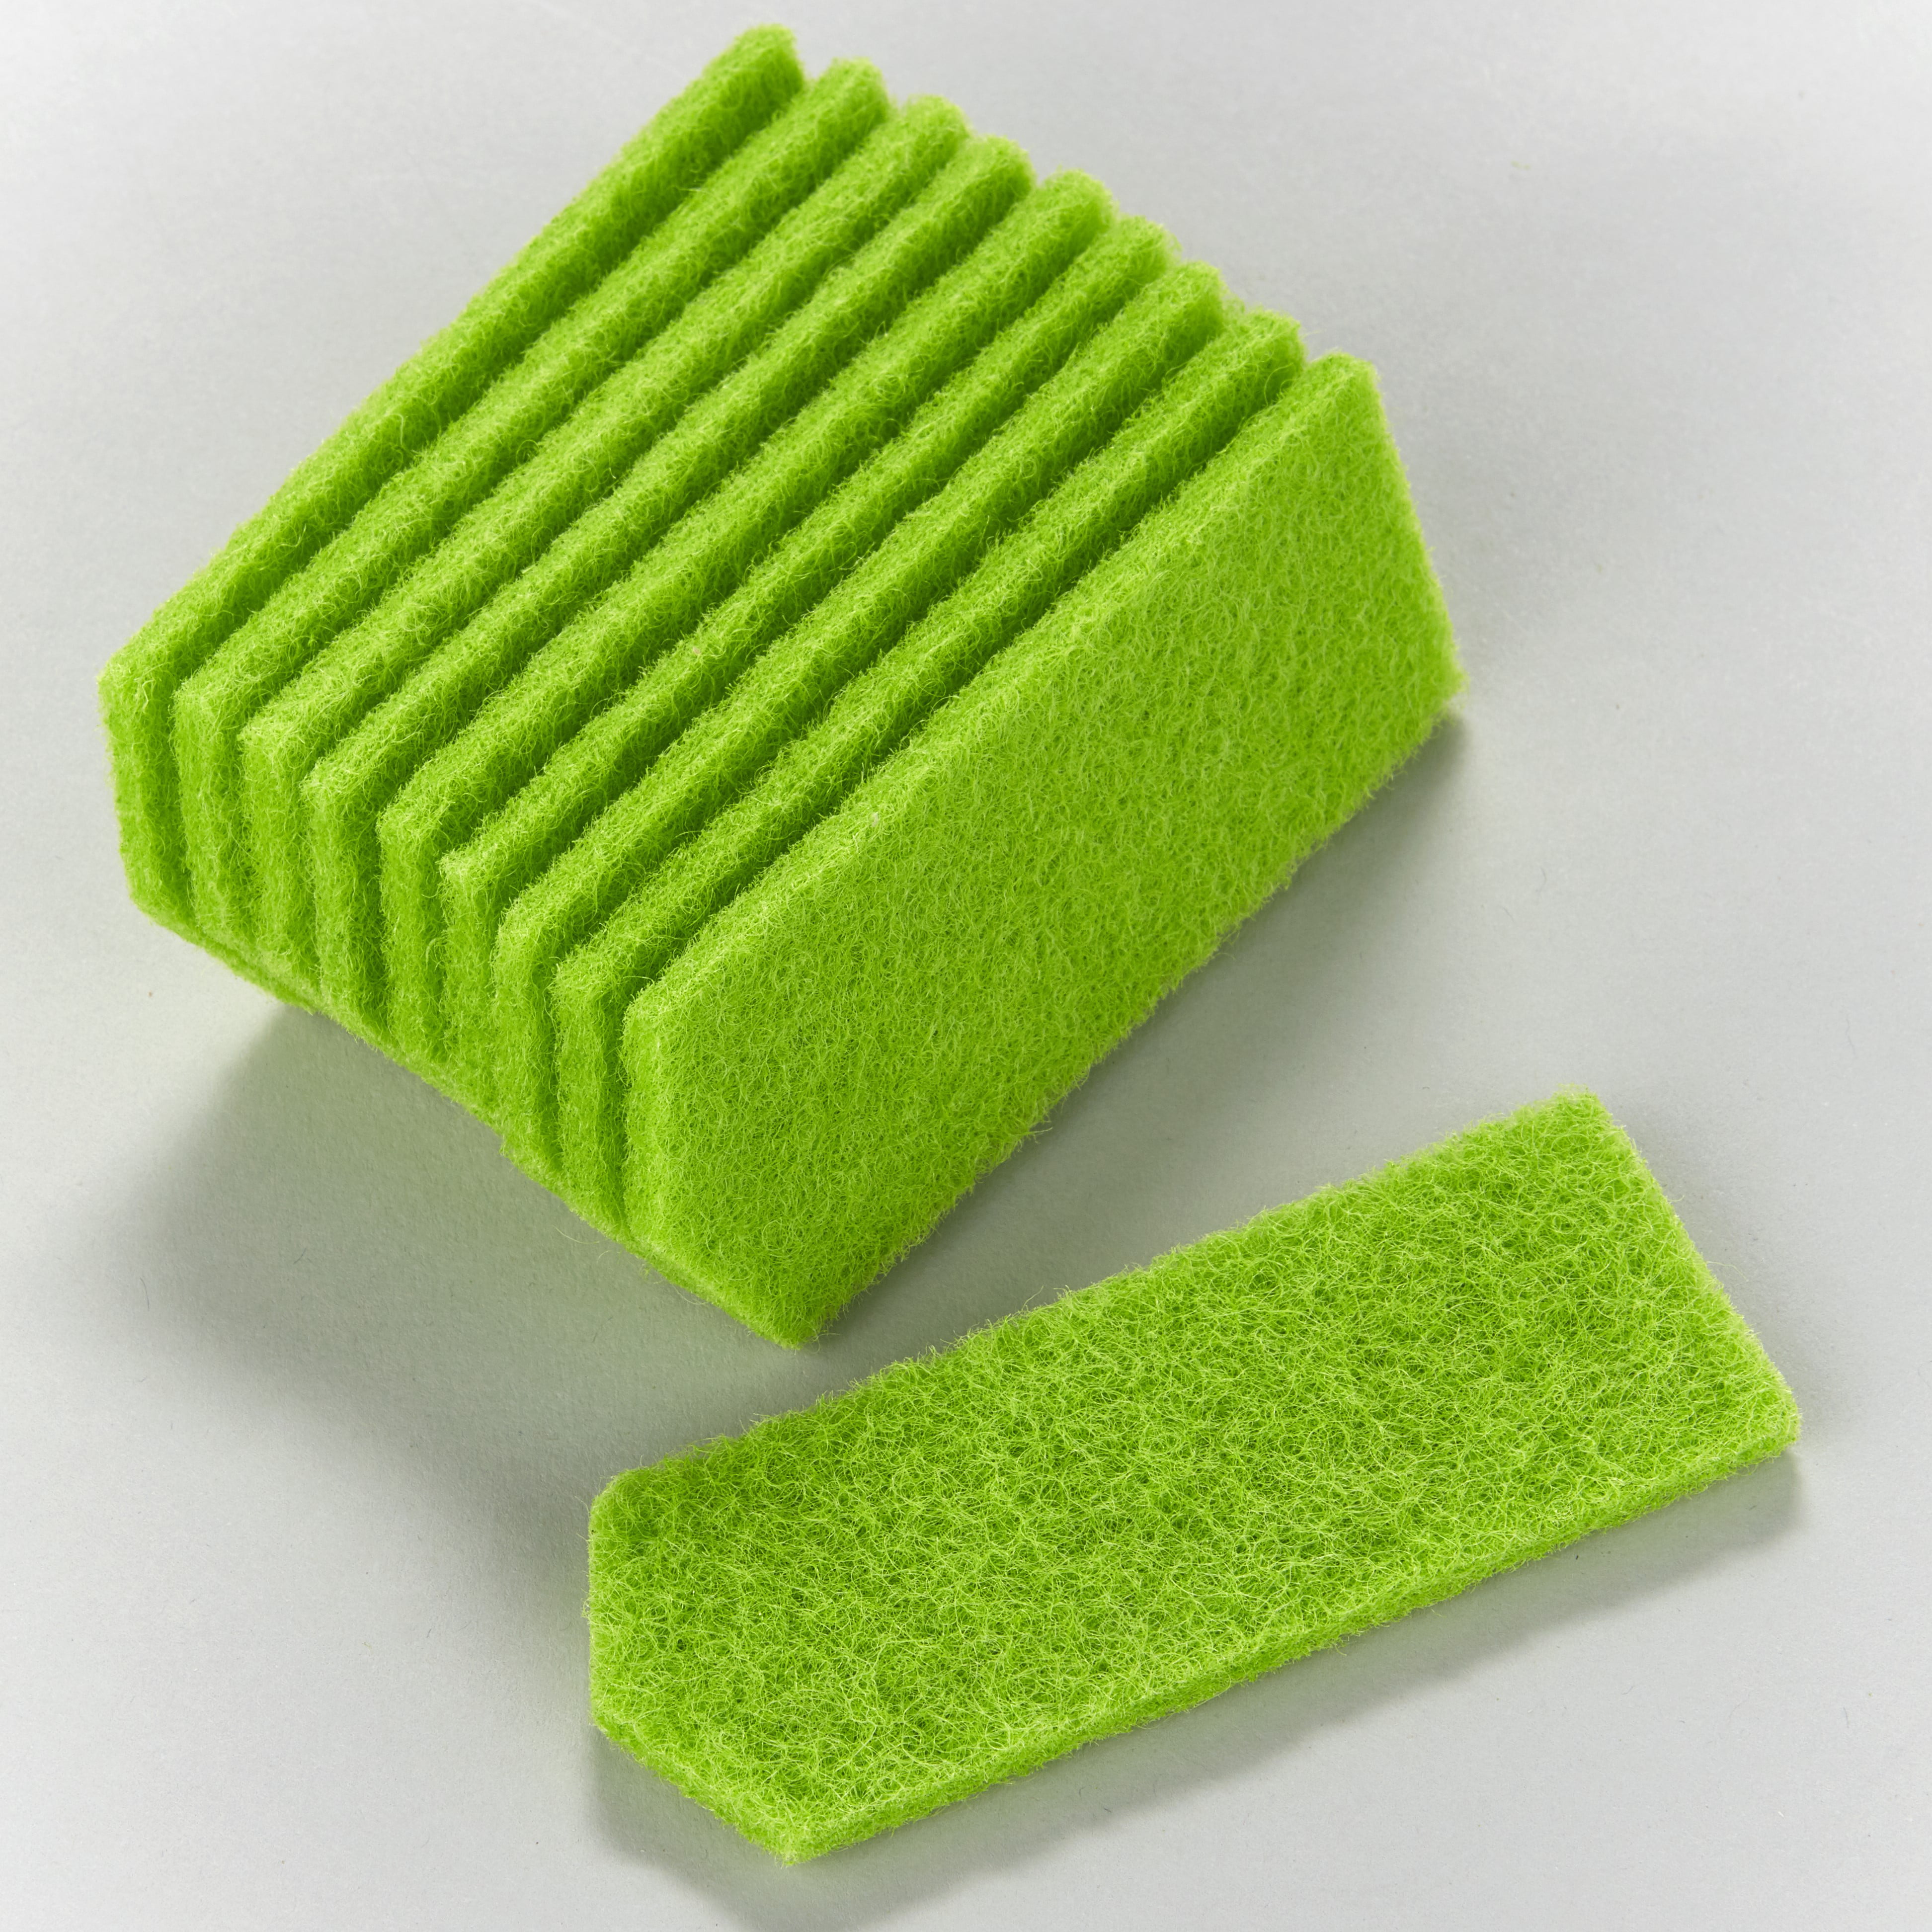 LTWHOME Yellow and Green Multi-Purpose Scrubber Sponges with Sponge Holder Set Pack of 8